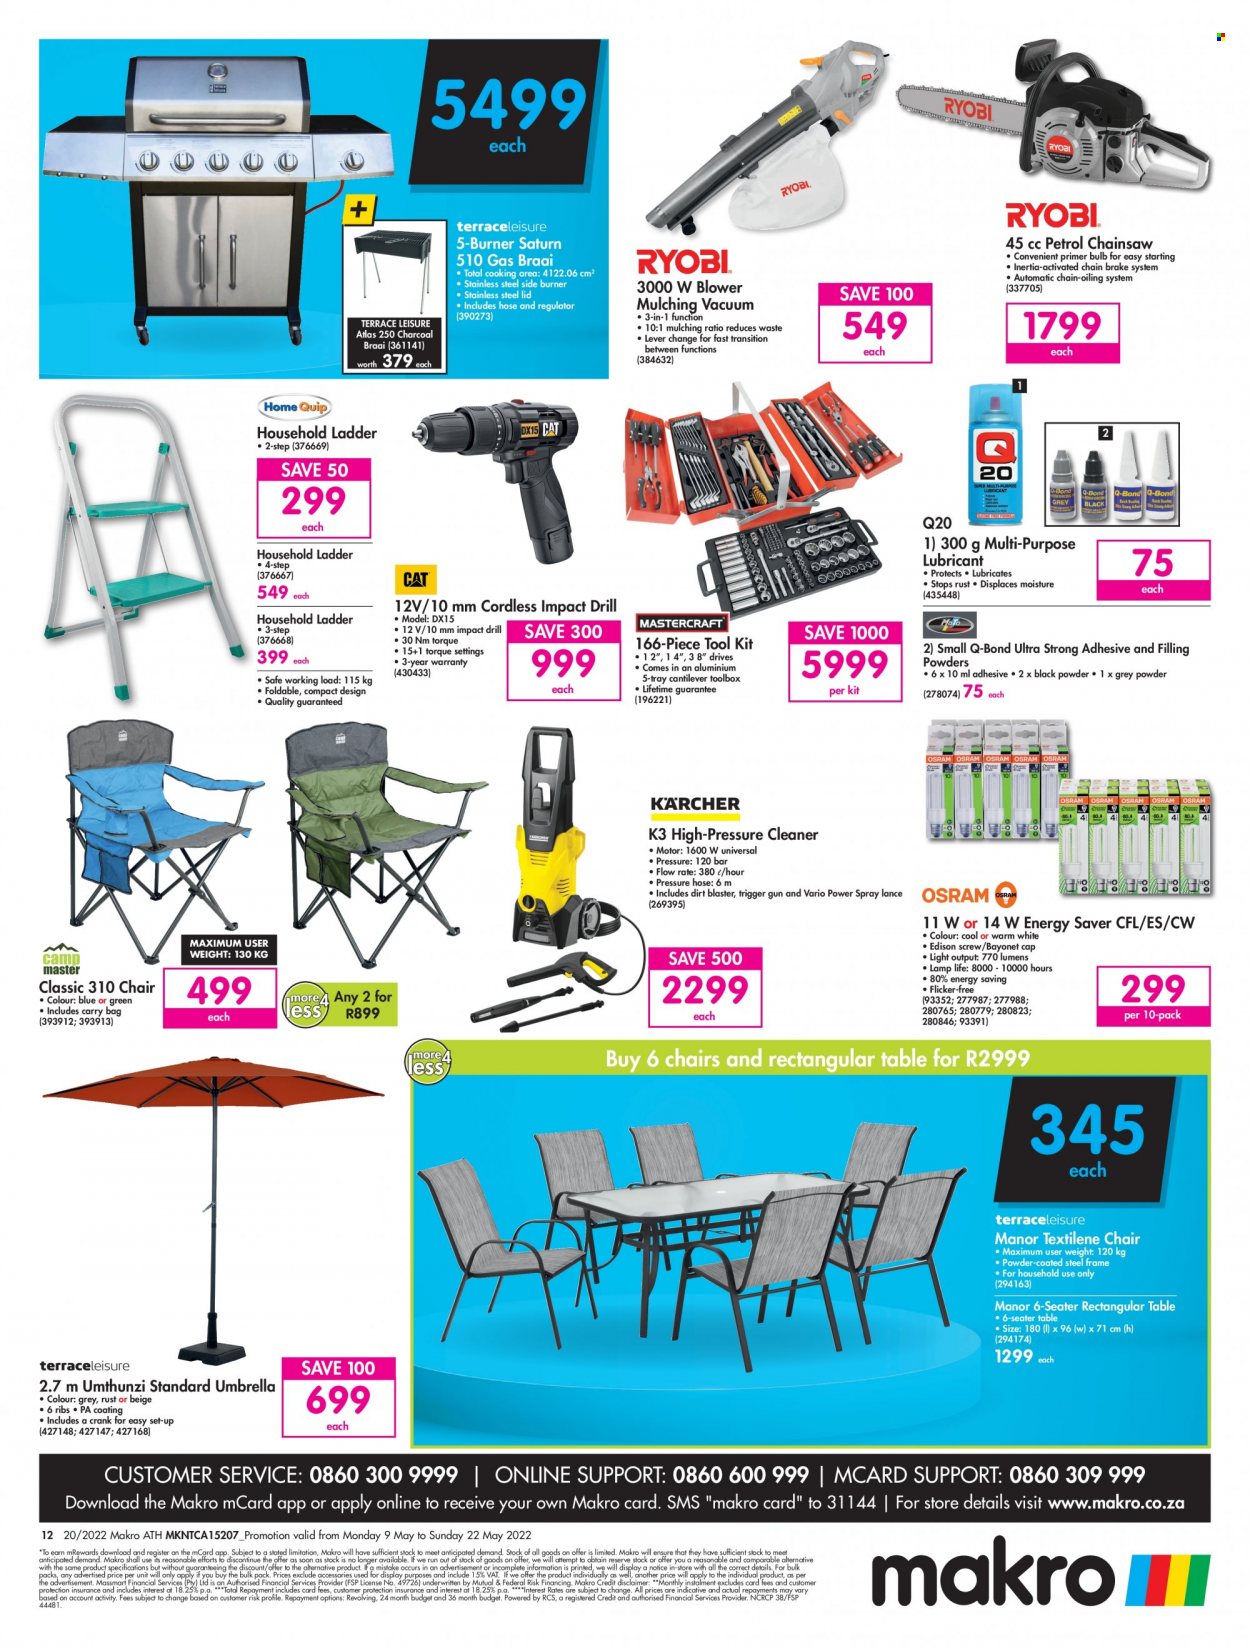 Makro Specials  - 05.09.2022 - 05.22.2022. Page 12.